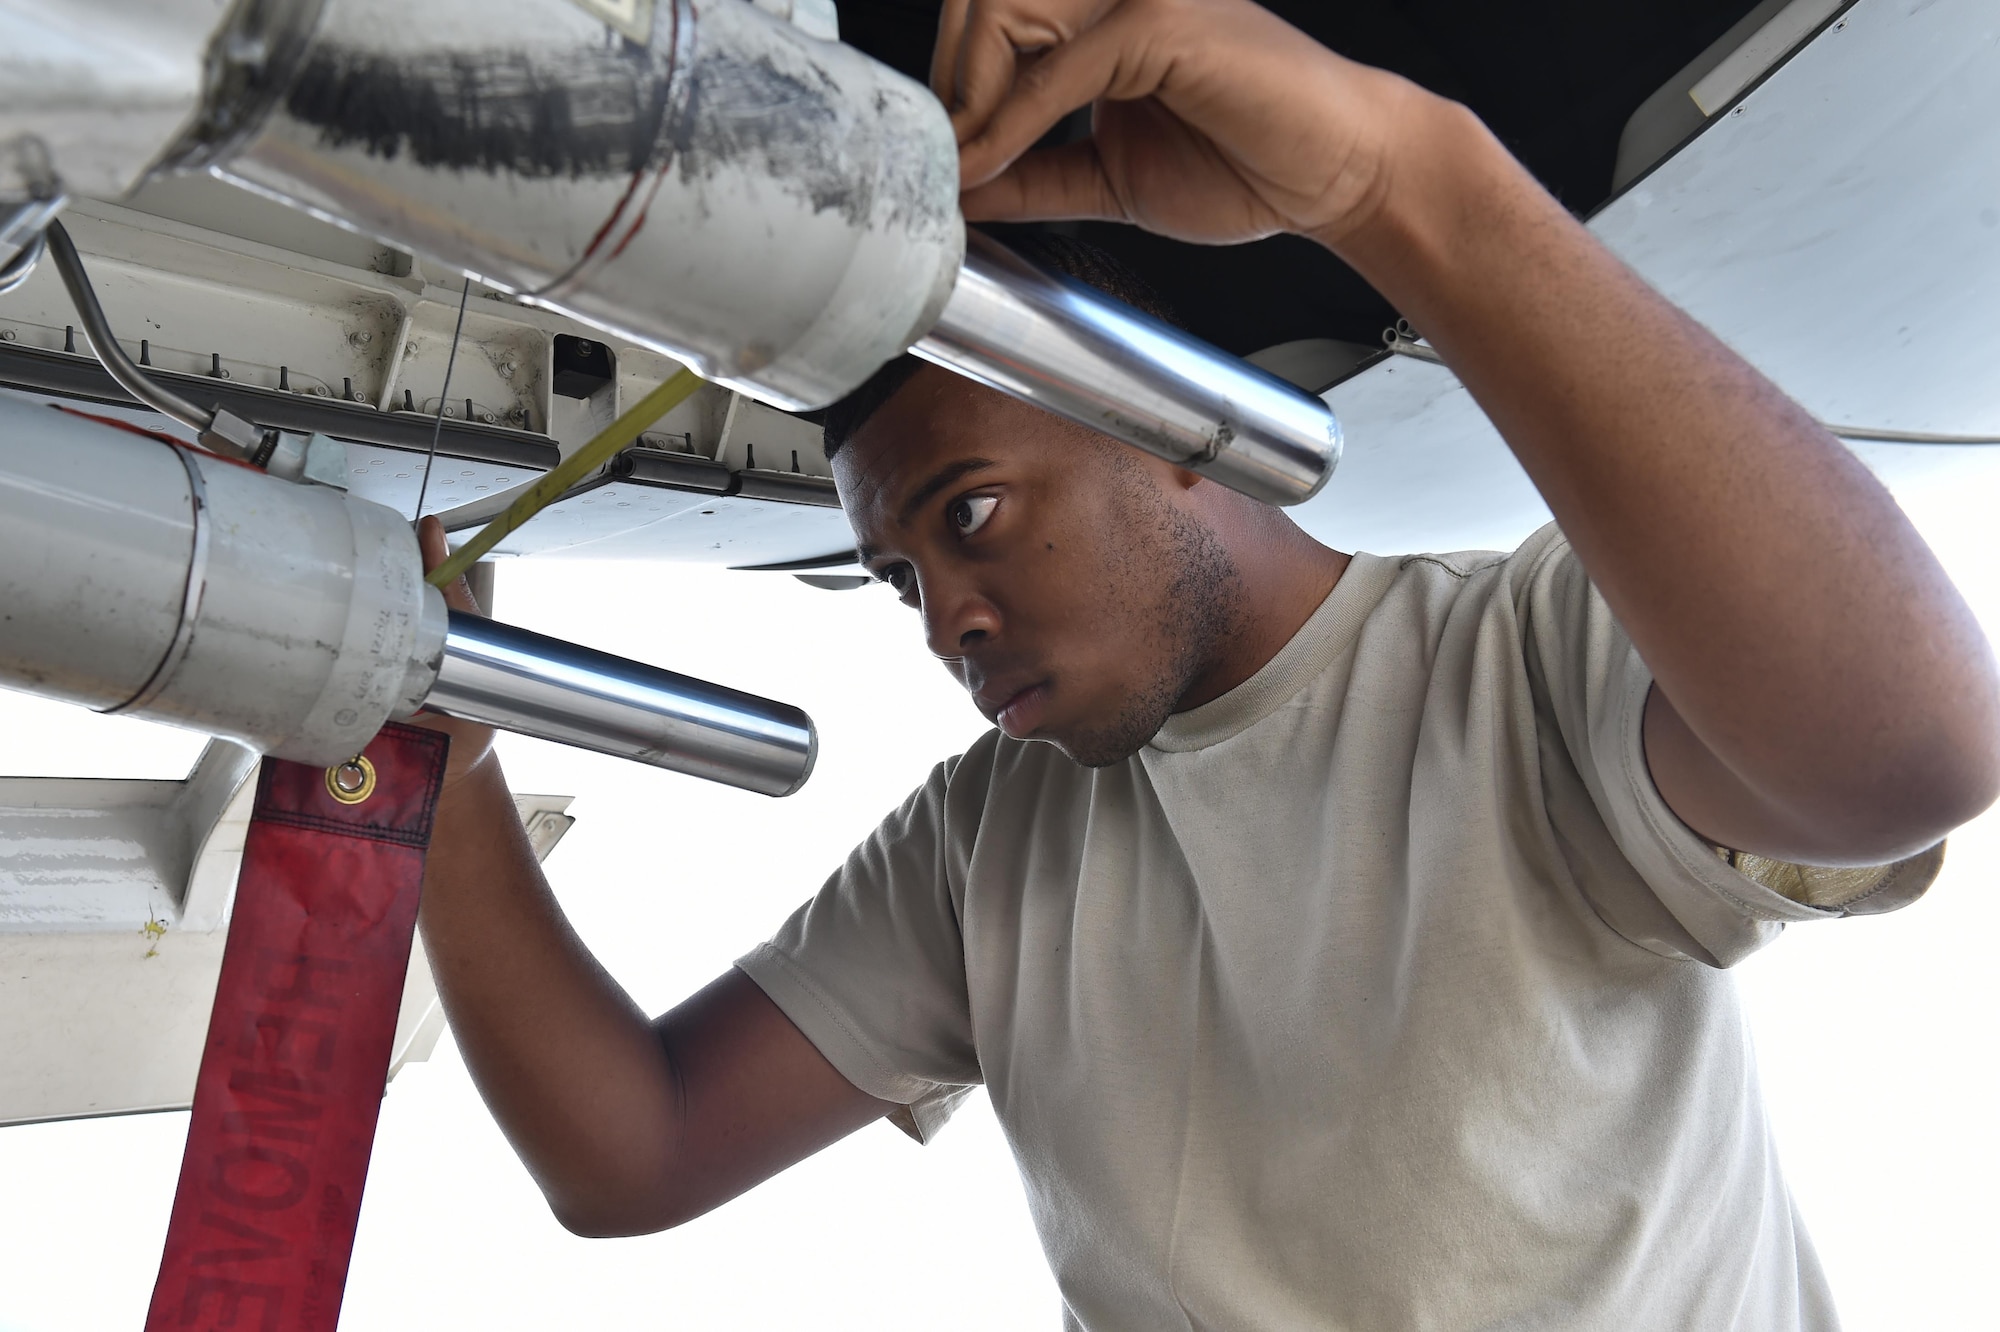 Airman 1st Class Billy Crocket, a 437th Aircraft Maintenance Squadron aerospace maintenance journeyman, performs preflight inspections on landing gear on a C-17 Globemaster III during Crescent Reach 16 at Joint Base Charleston, S.C., May 24, 2016. Crescent Reach is an annual exercise designed to test and evaluate Joint Base Charleston's ability to mobilize and launch a large aircraft formation in addition to training, processing and deploying Airmen and cargo in response to a simulated crisis abroad. (U.S. Air Force photo/Senior Airman Logan Carlson)